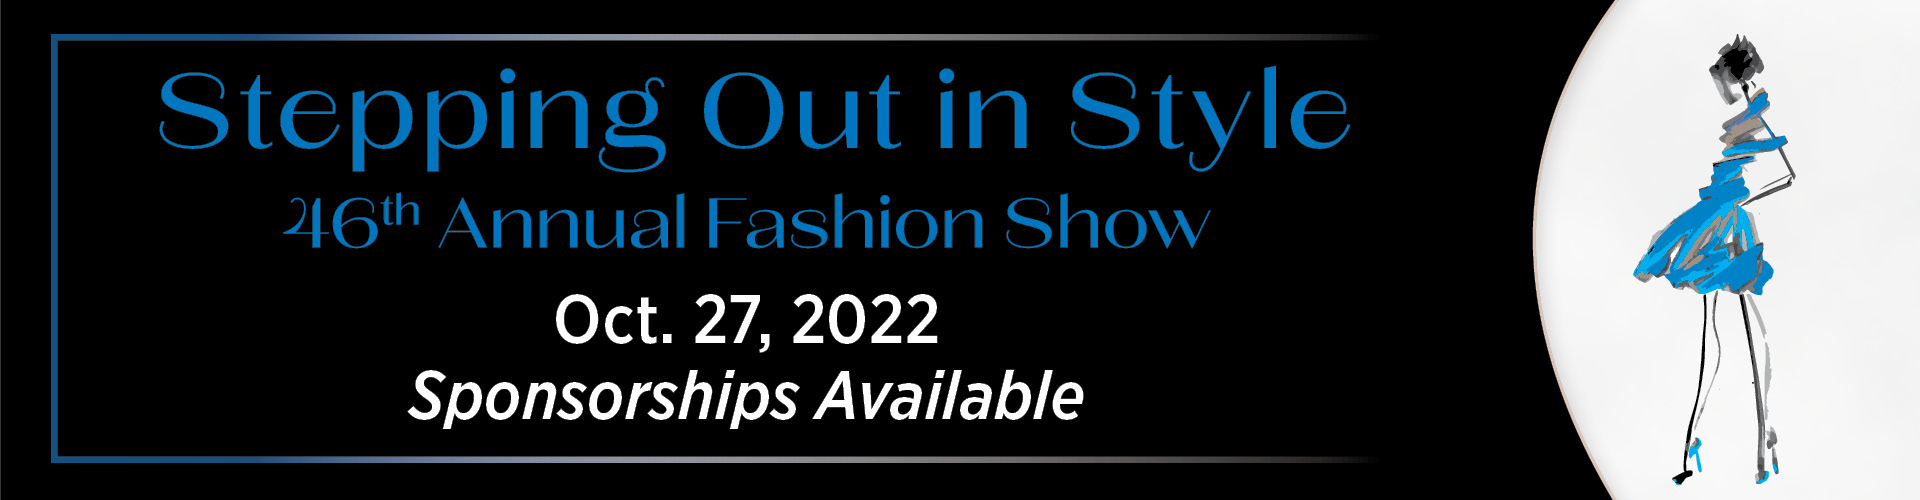 Drawn image of a women model in blue dress with Graphic text reading Stepping out in style 46th annual Fashion show Thursday, Oct. 27